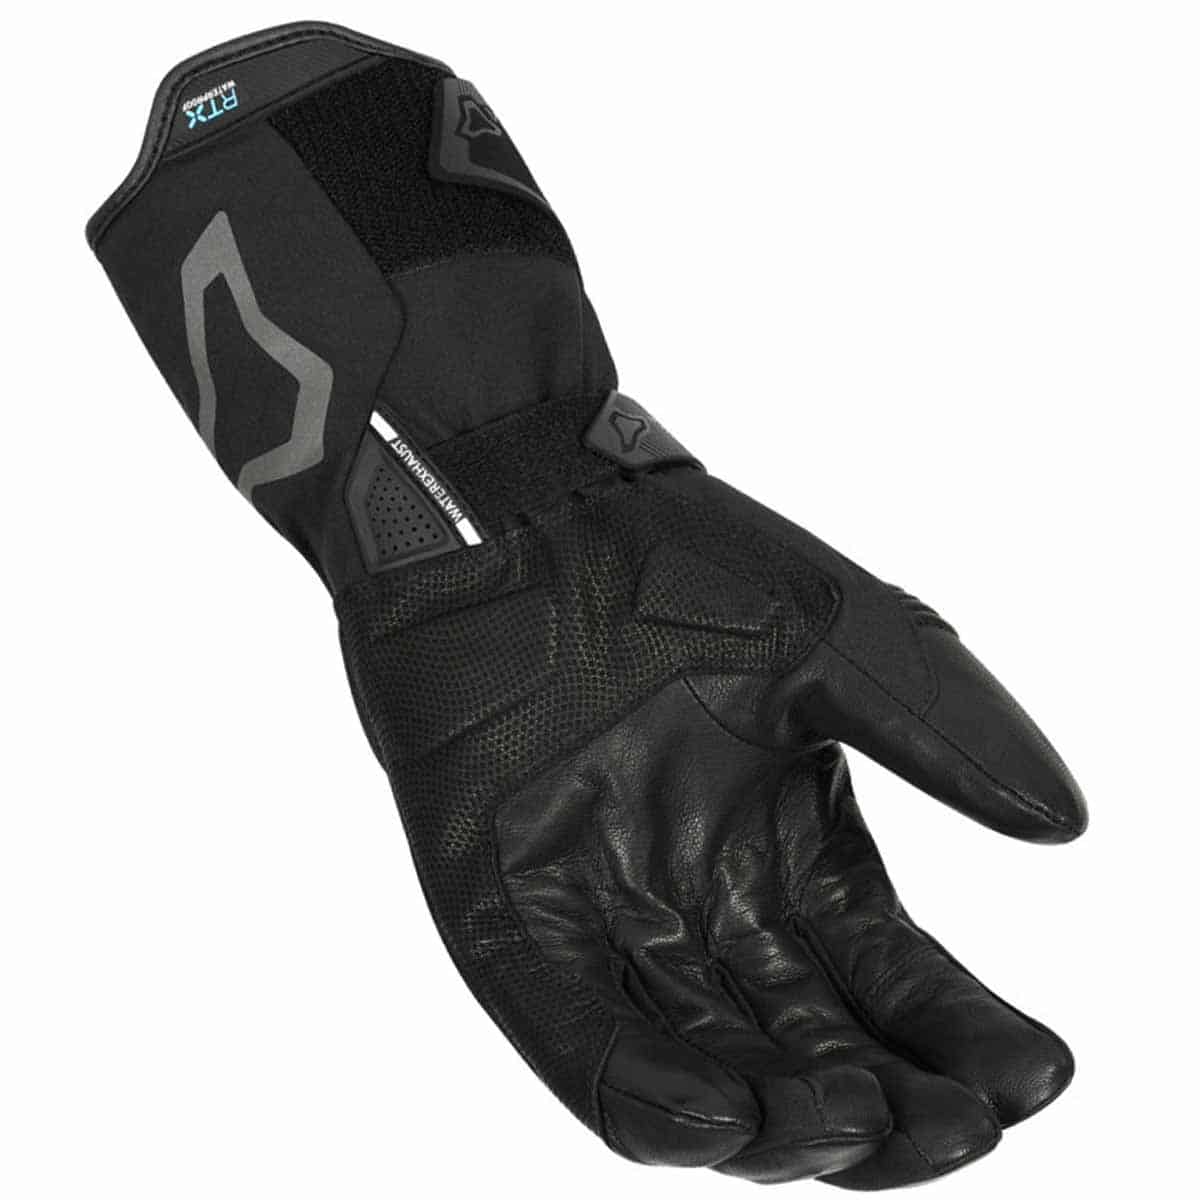 Macna Azra RTX Heated Gloves: Heated gloves powered by portable batteries or direct from the 'bike battery 2